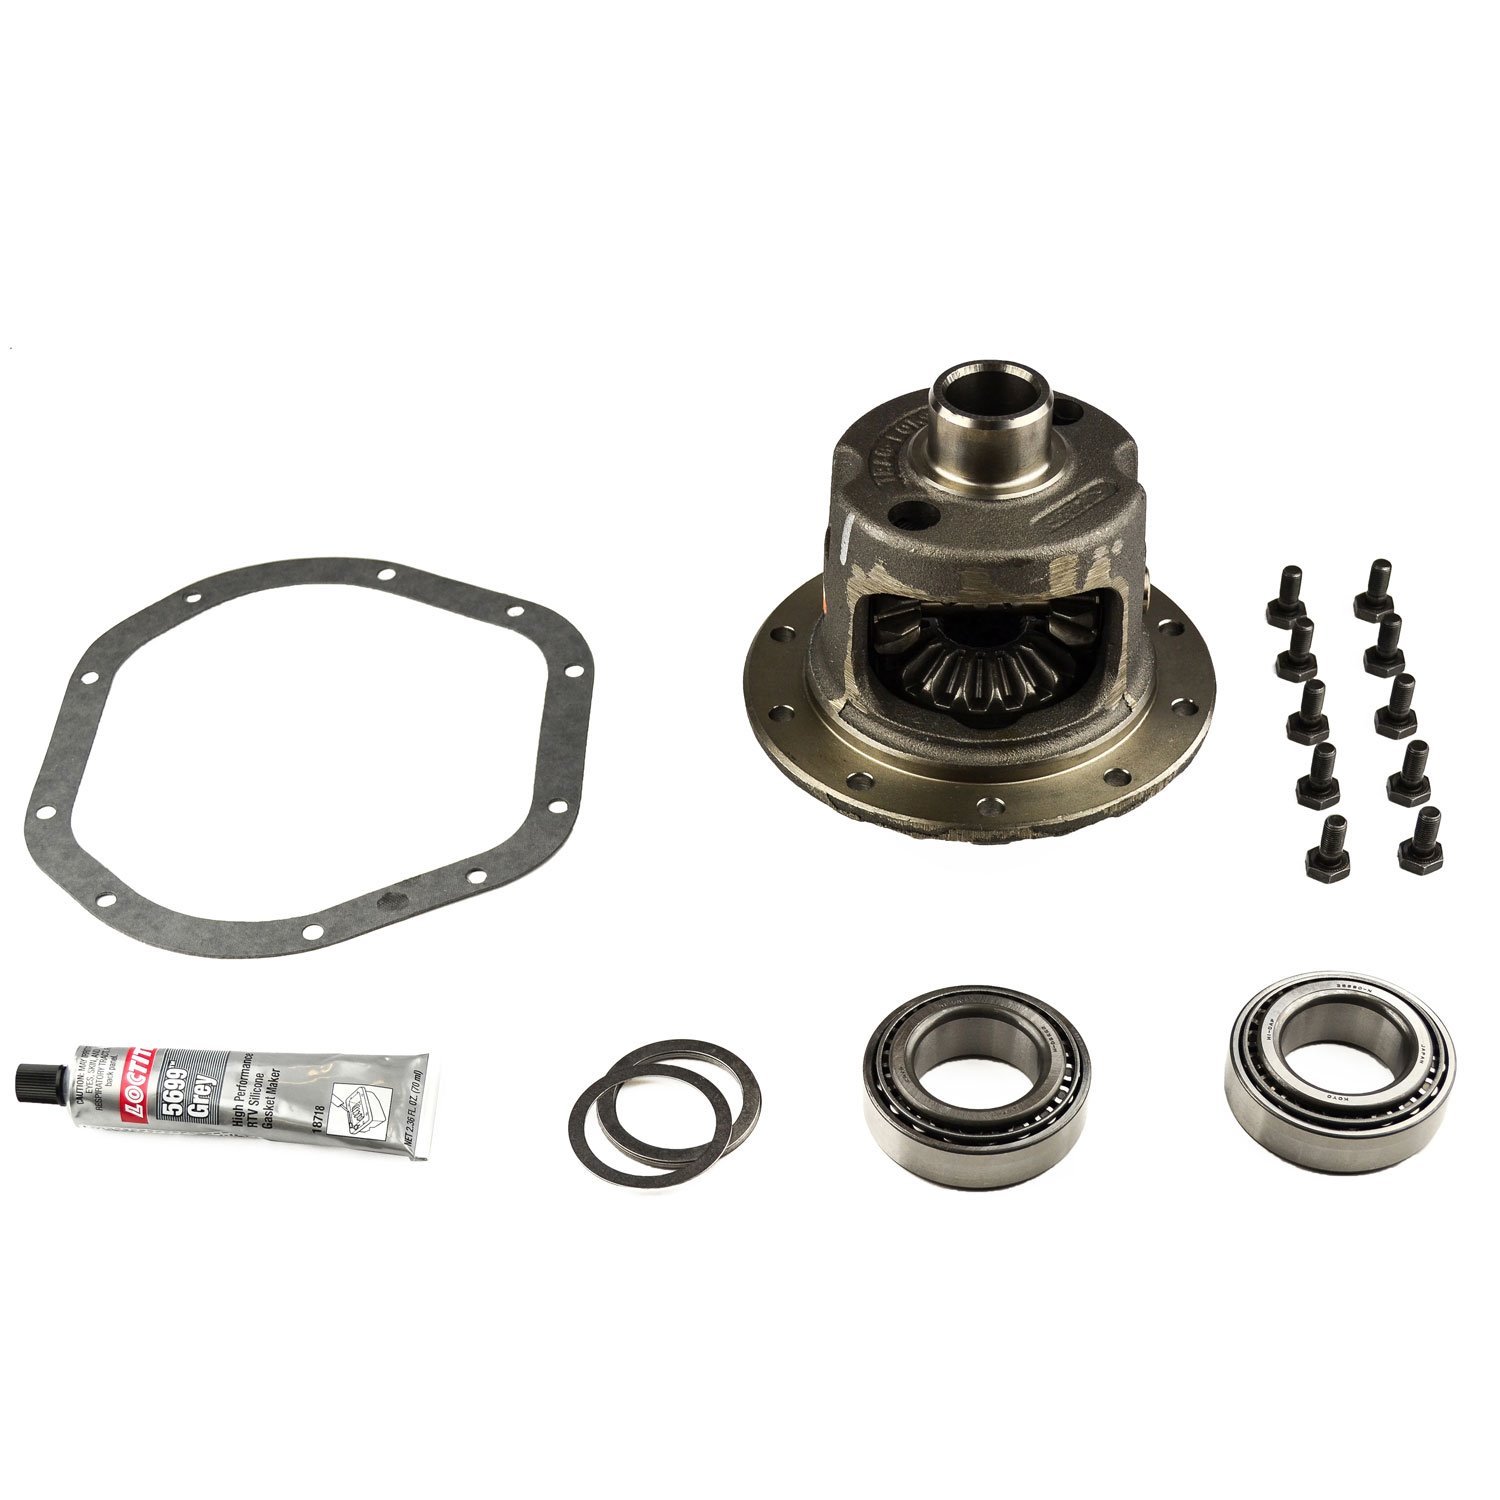 Differential Carrier Case Kit Fits: Dana 44 Limited